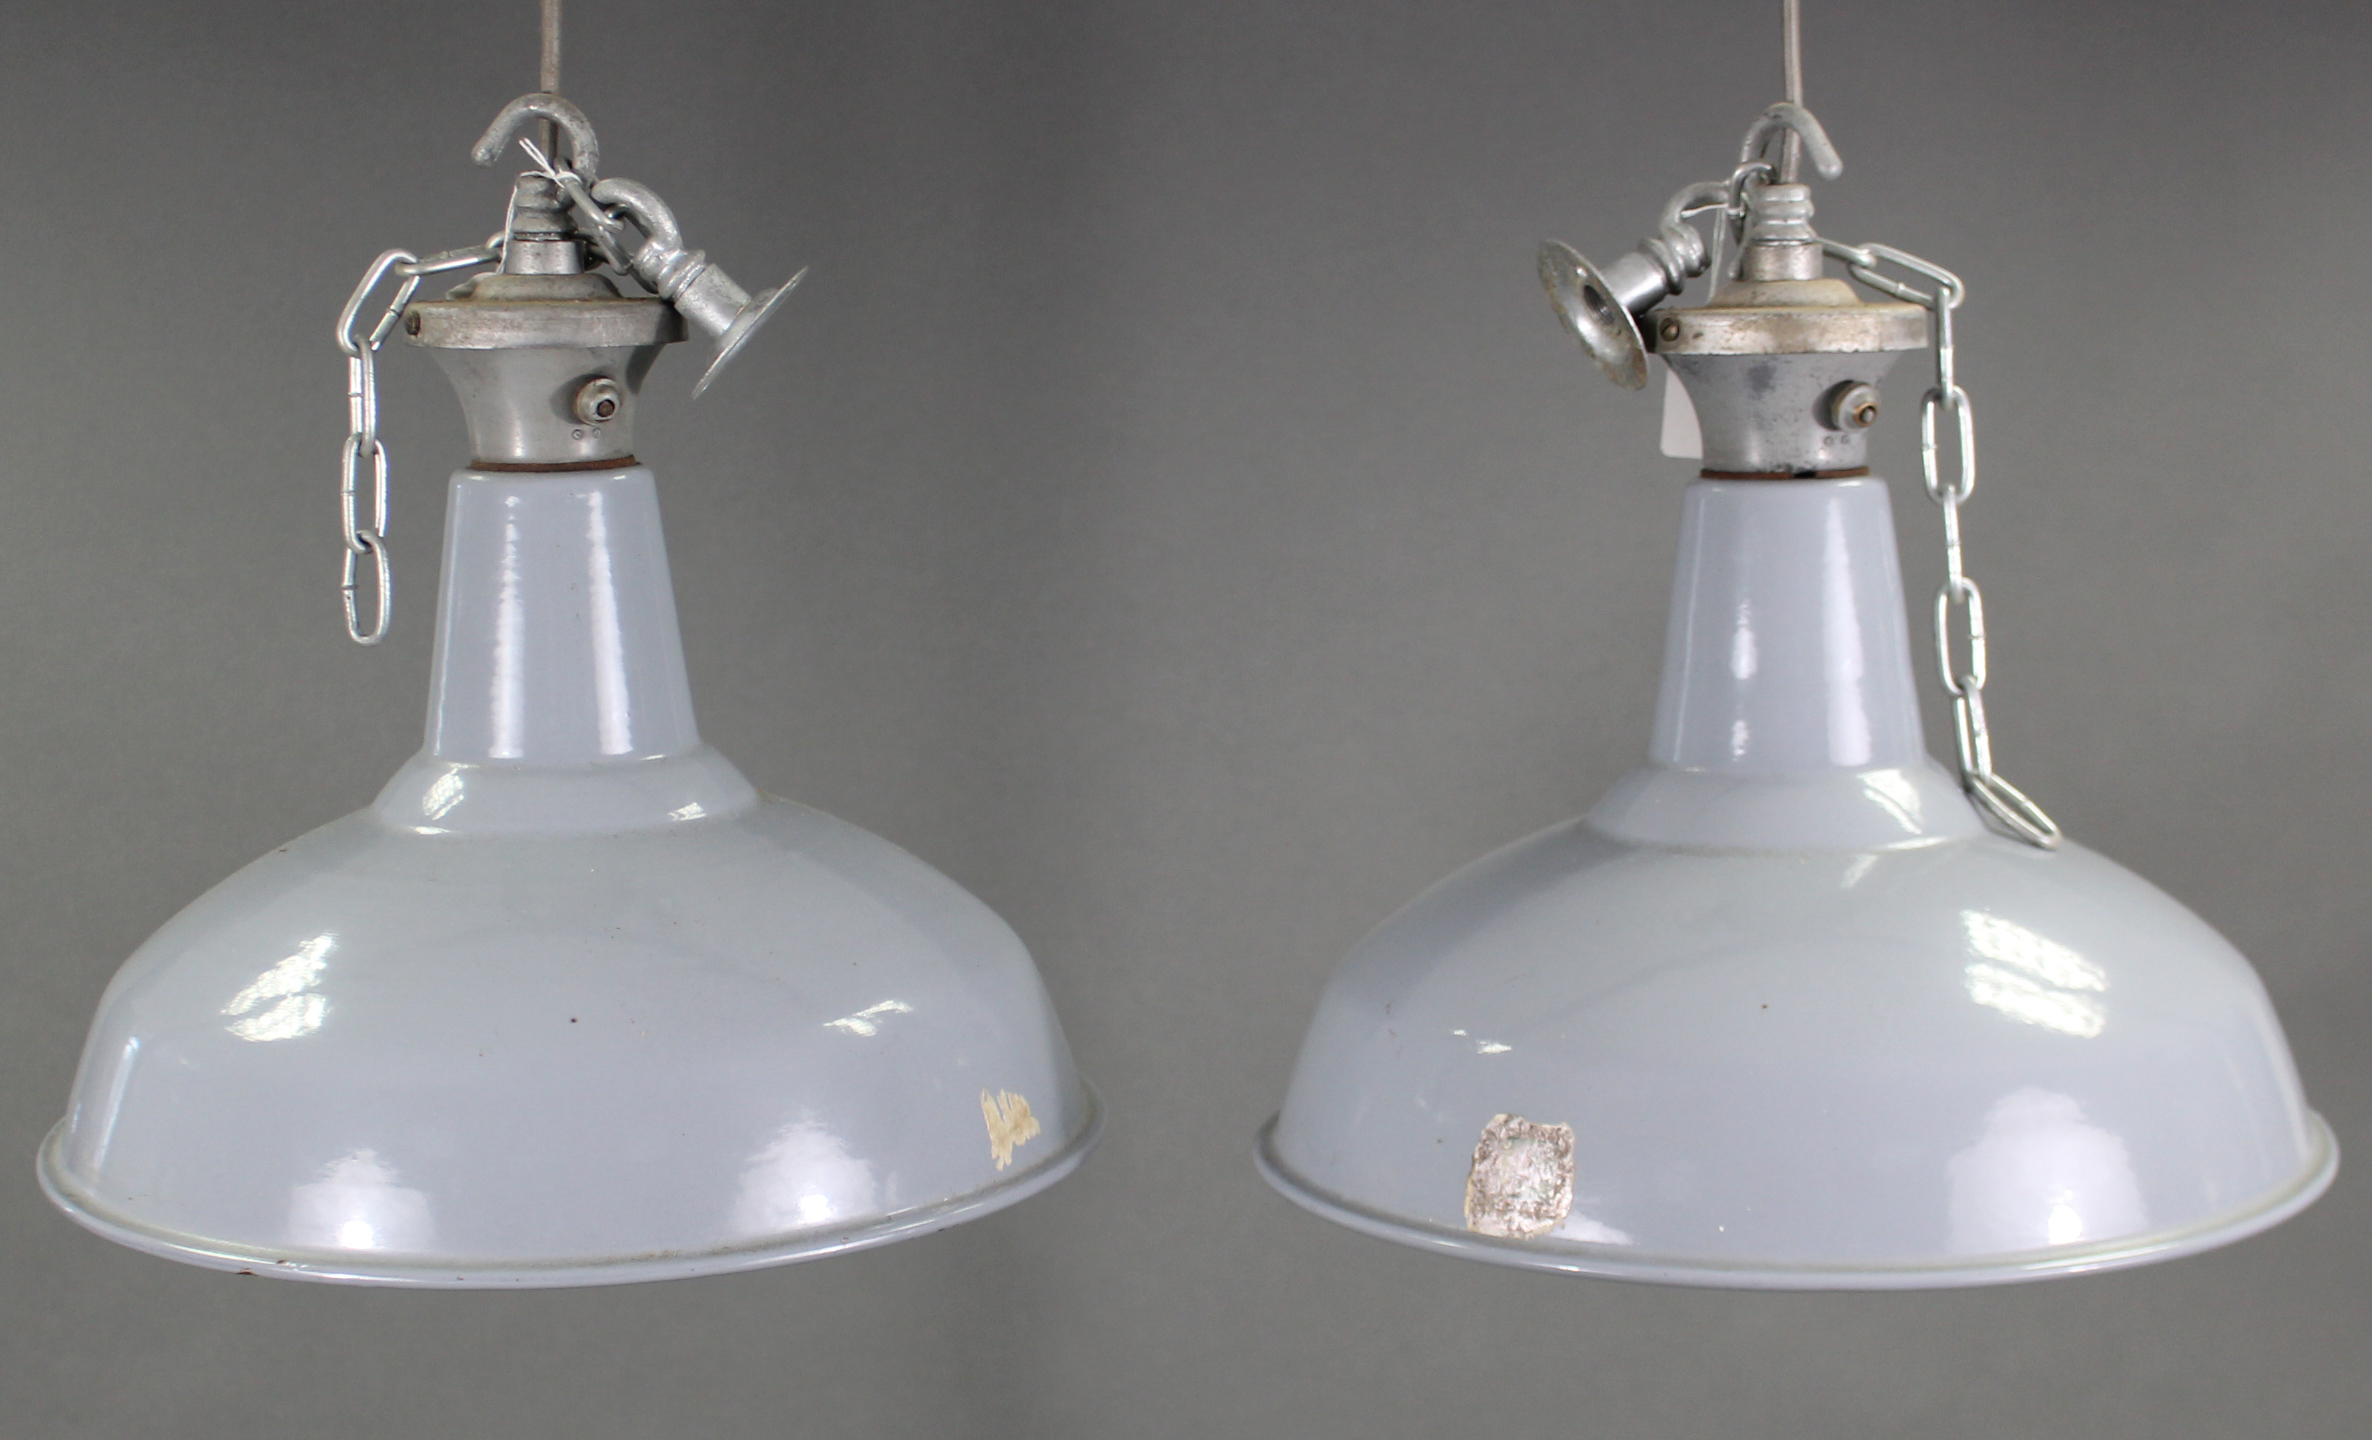 A pair of mid-20th century Benjamin industrial pendant ceiling lights with blue/grey enamel - Image 2 of 7